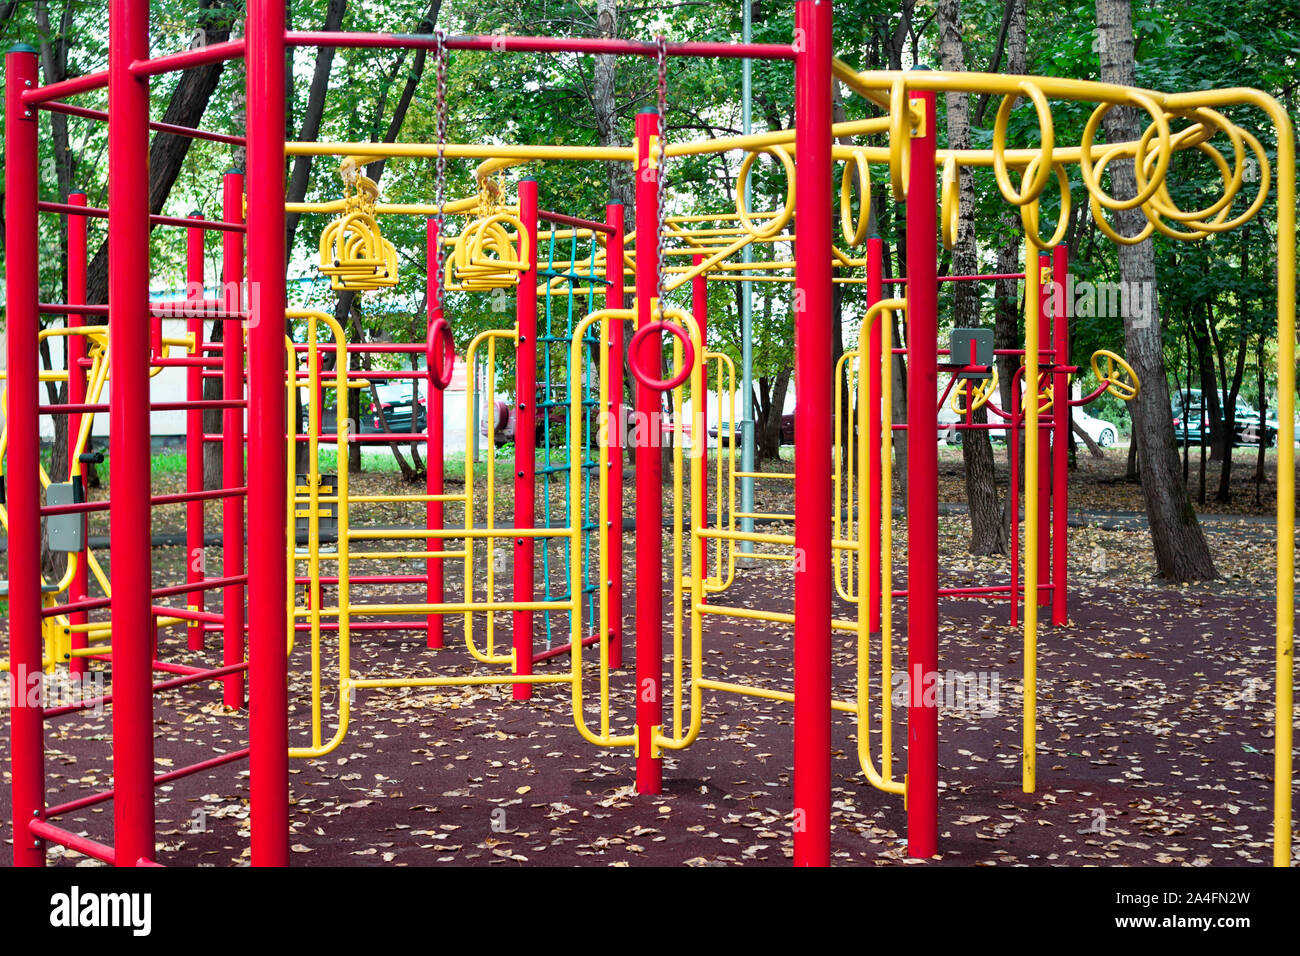 Metal children's outdoor playground equipment bars swing yellow and red color on natural background view. Stock Photo